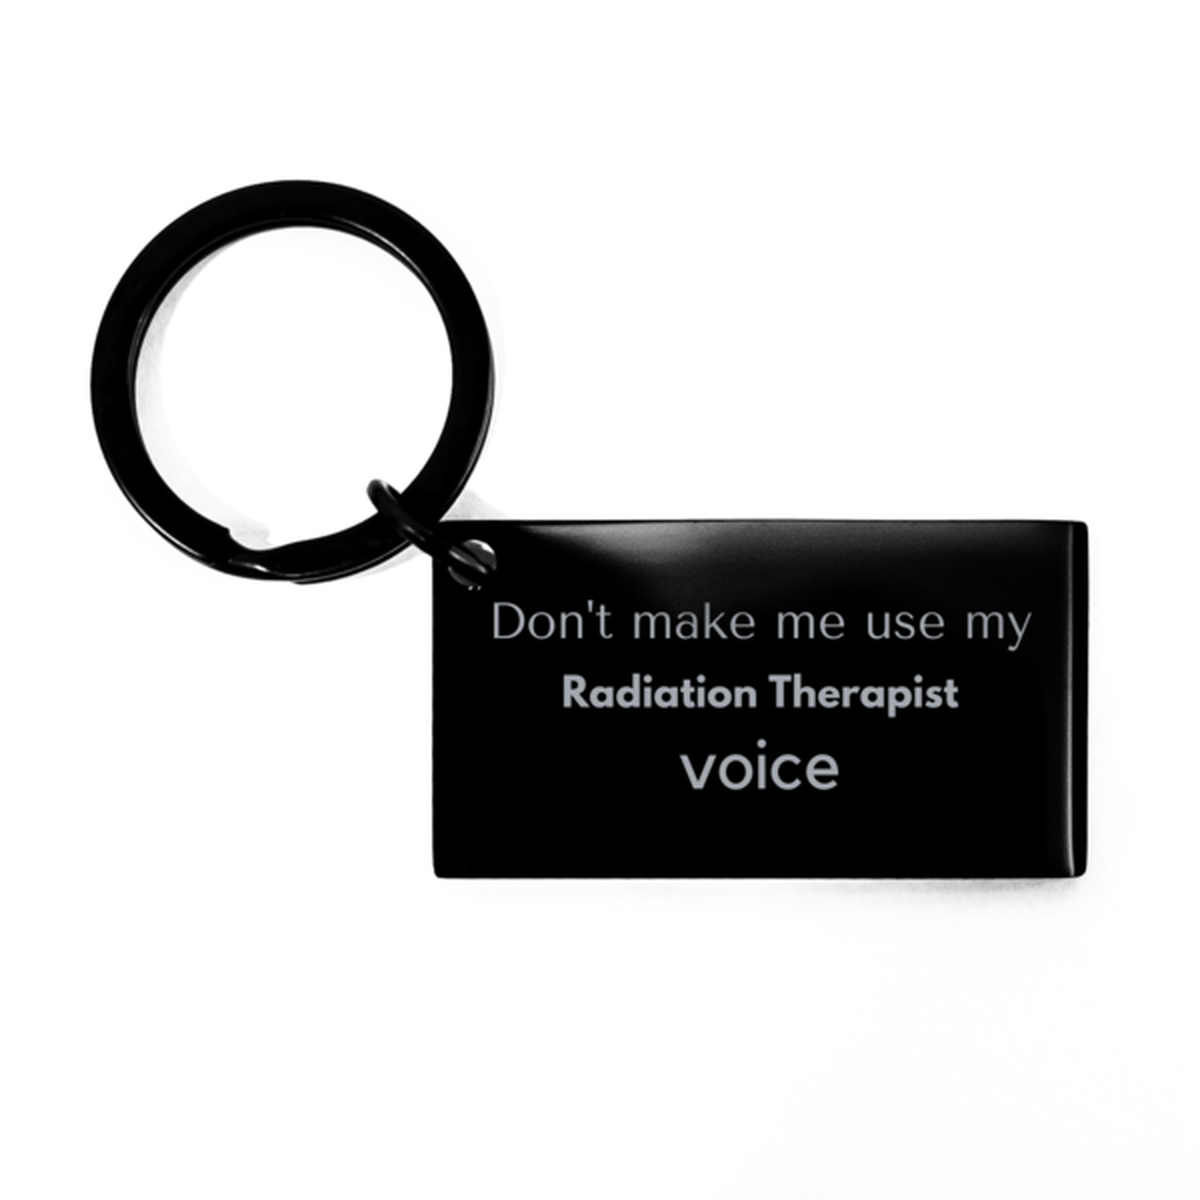 Don't make me use my Radiation Therapist voice, Sarcasm Radiation Therapist Gifts, Christmas Radiation Therapist Keychain Birthday Unique Gifts For Radiation Therapist Coworkers, Men, Women, Colleague, Friends